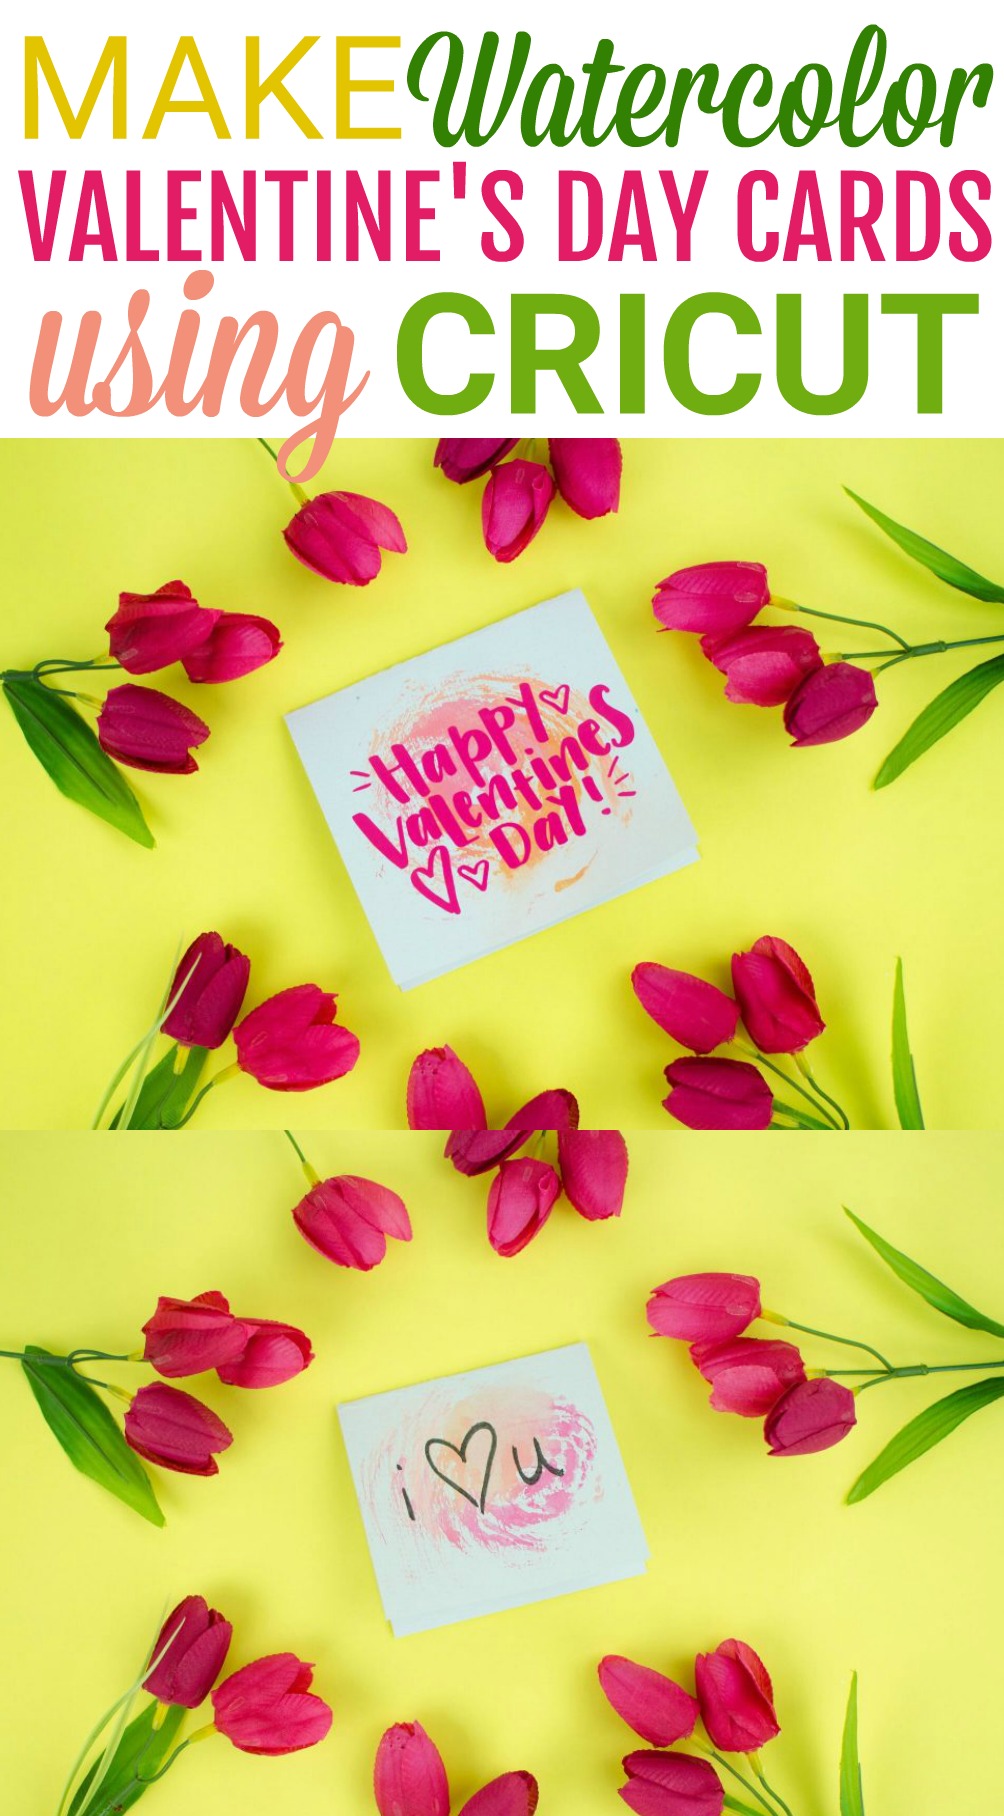 Valentines Day Cards For Him Cricut / Check out our valentines day card